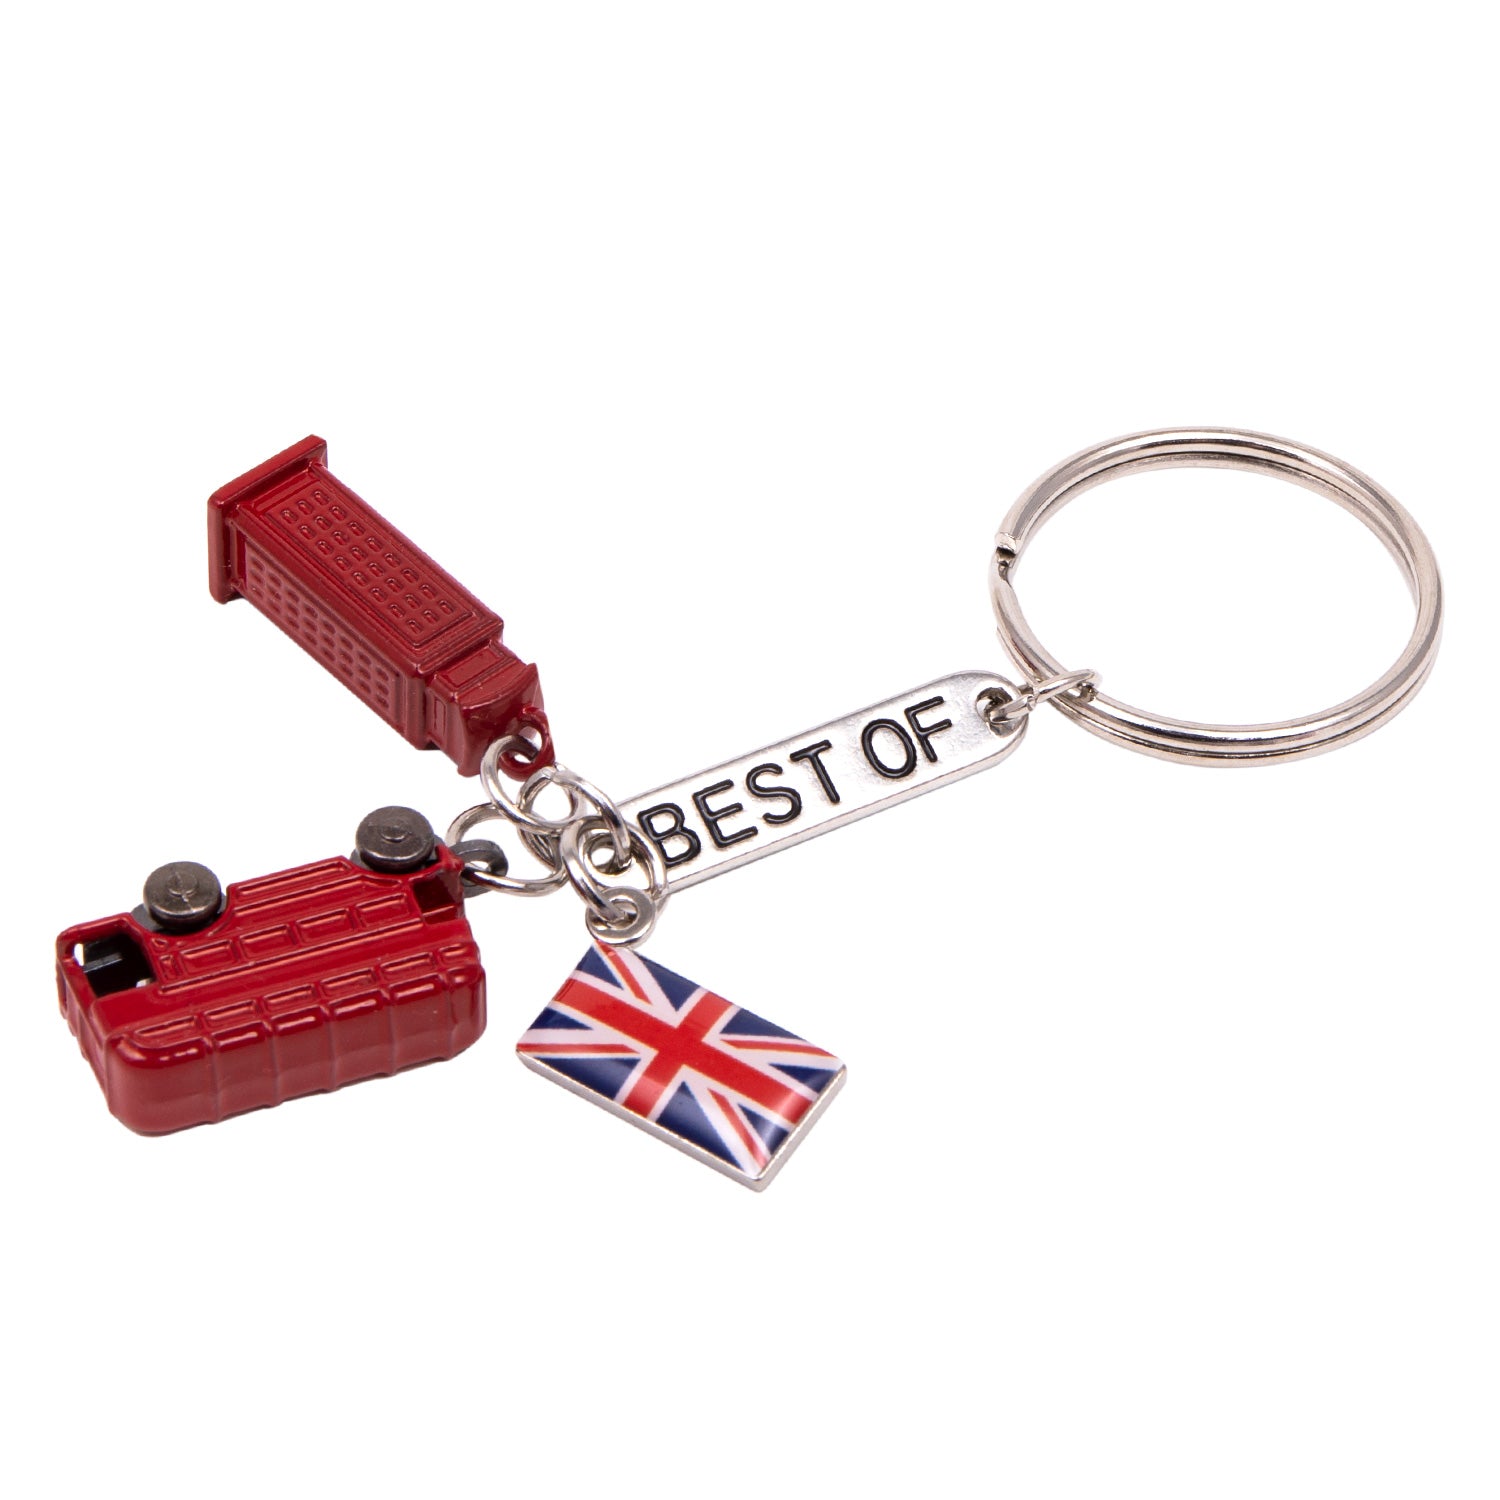 Best of British - London Bus, Telephone Box and Union Jack Die Cast Keyring 1